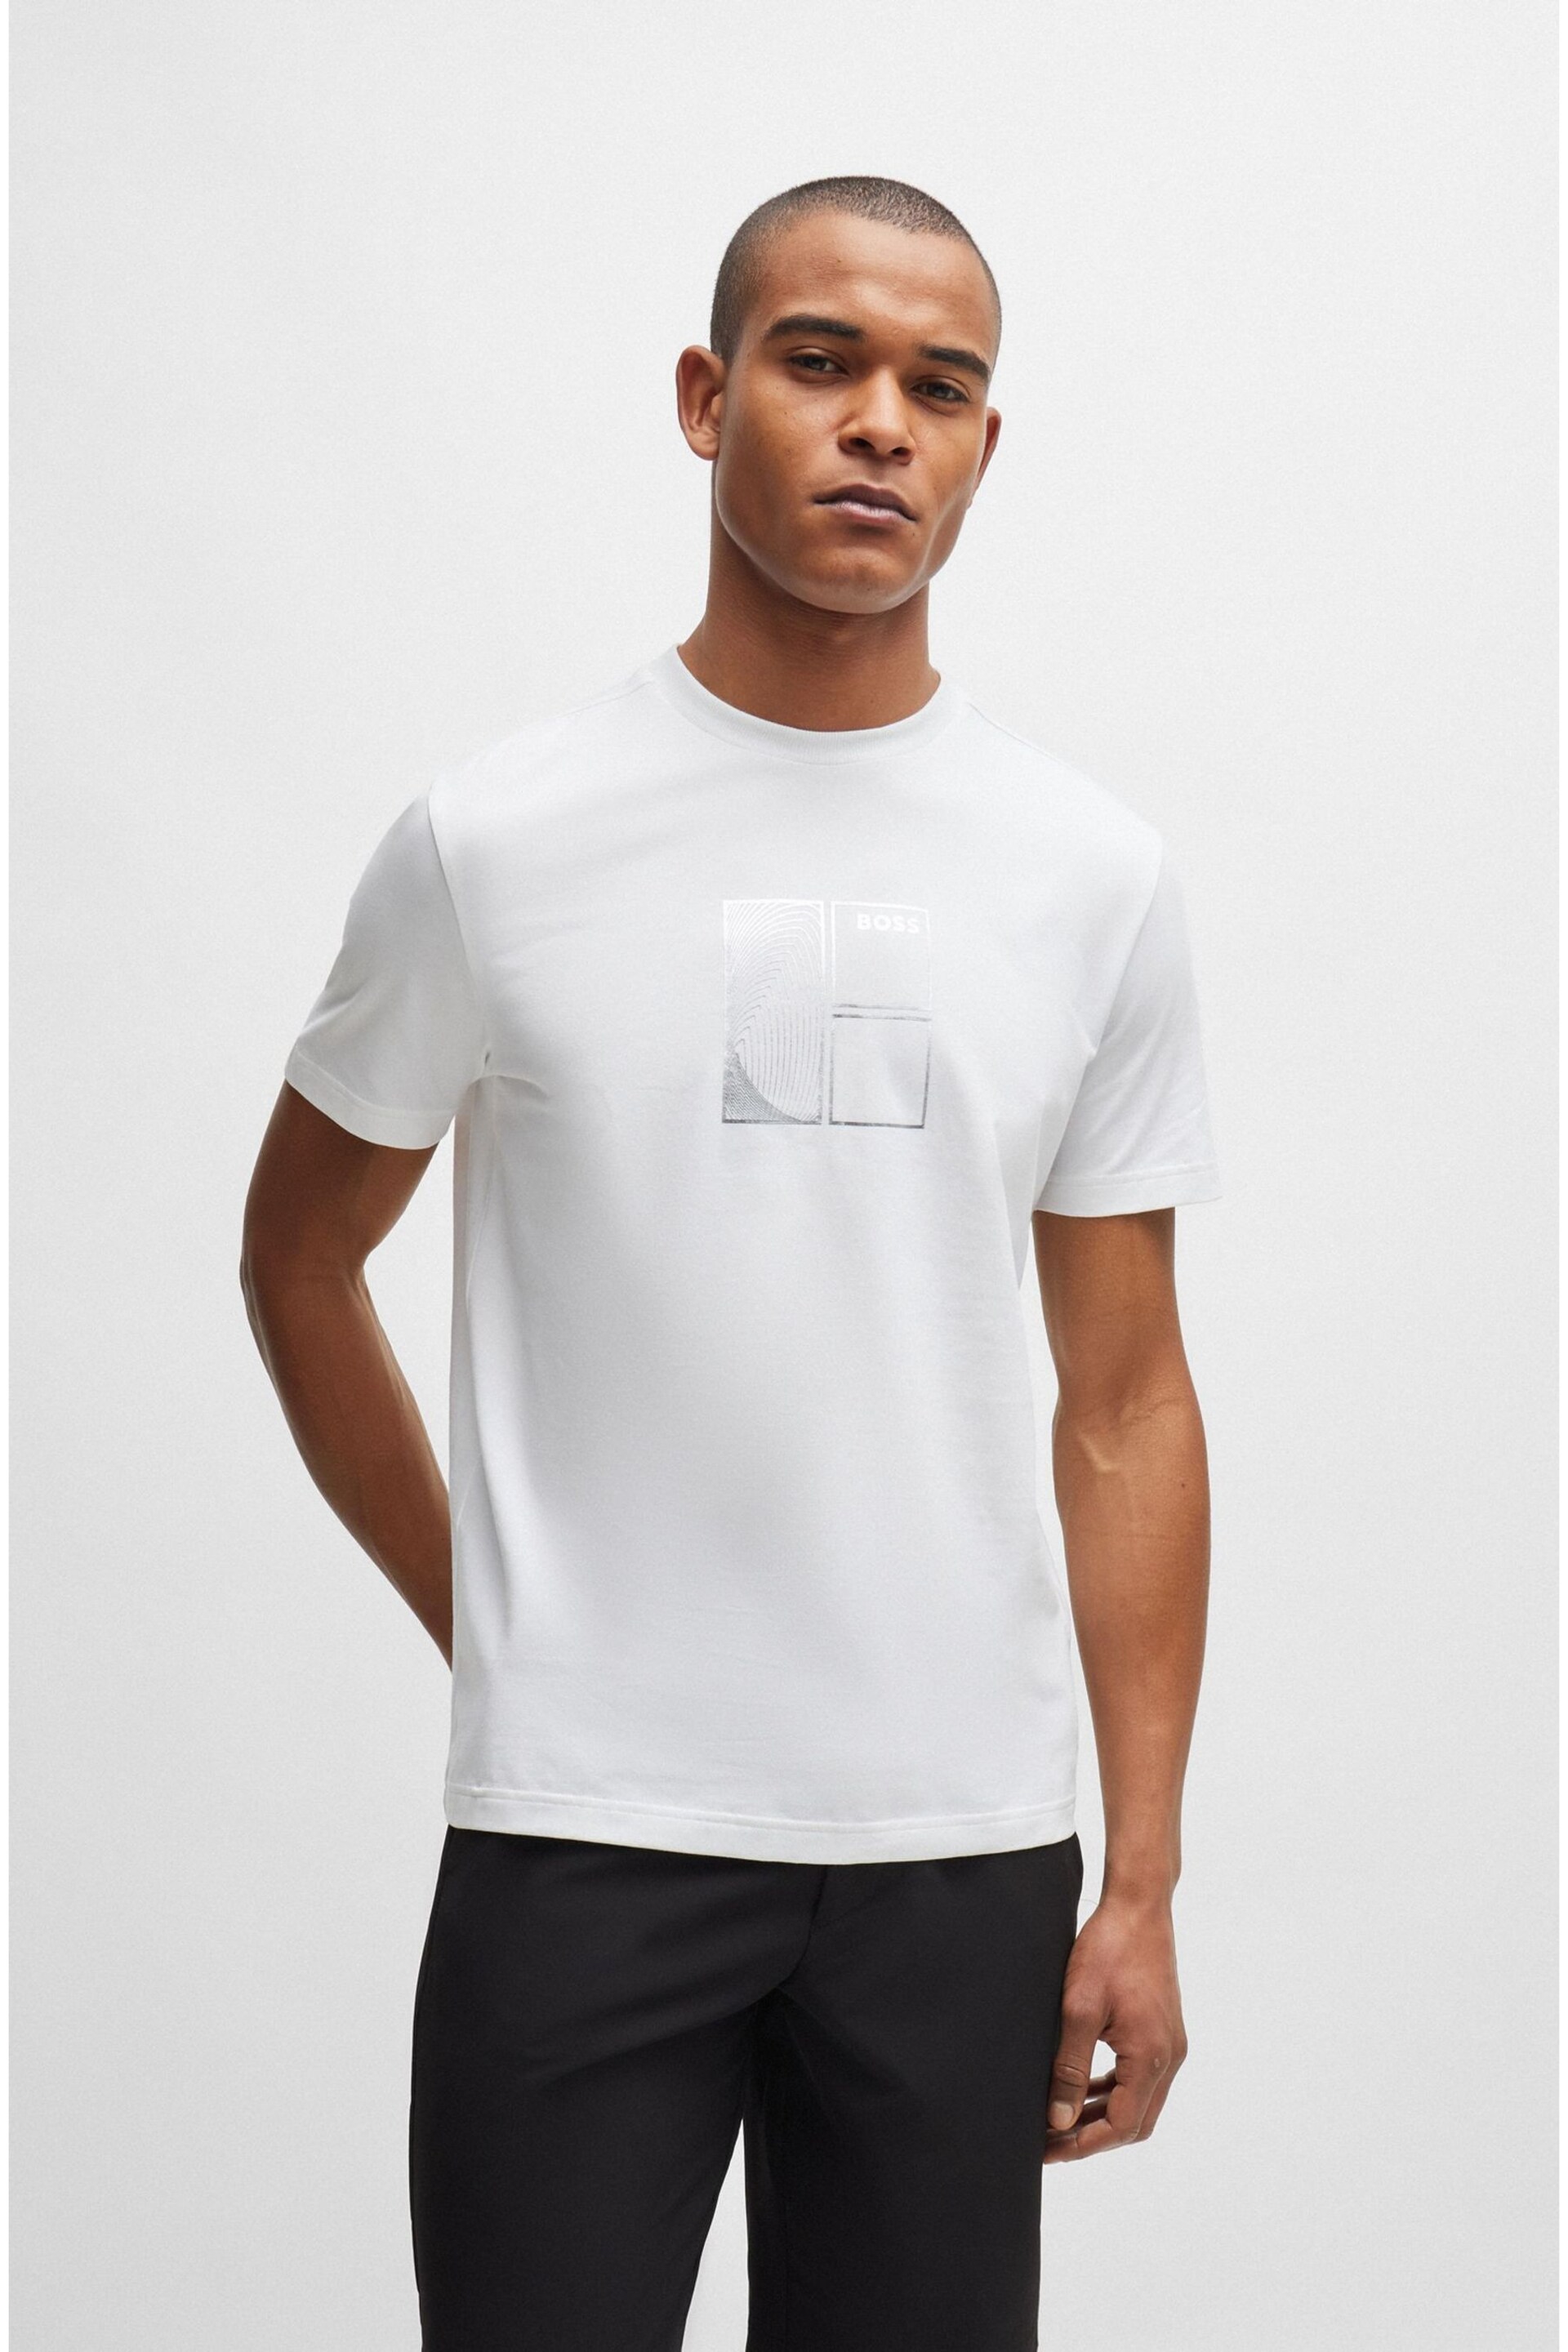 BOSS White Stretch-Cotton T-Shirt With Metallic Artwork - Image 1 of 5